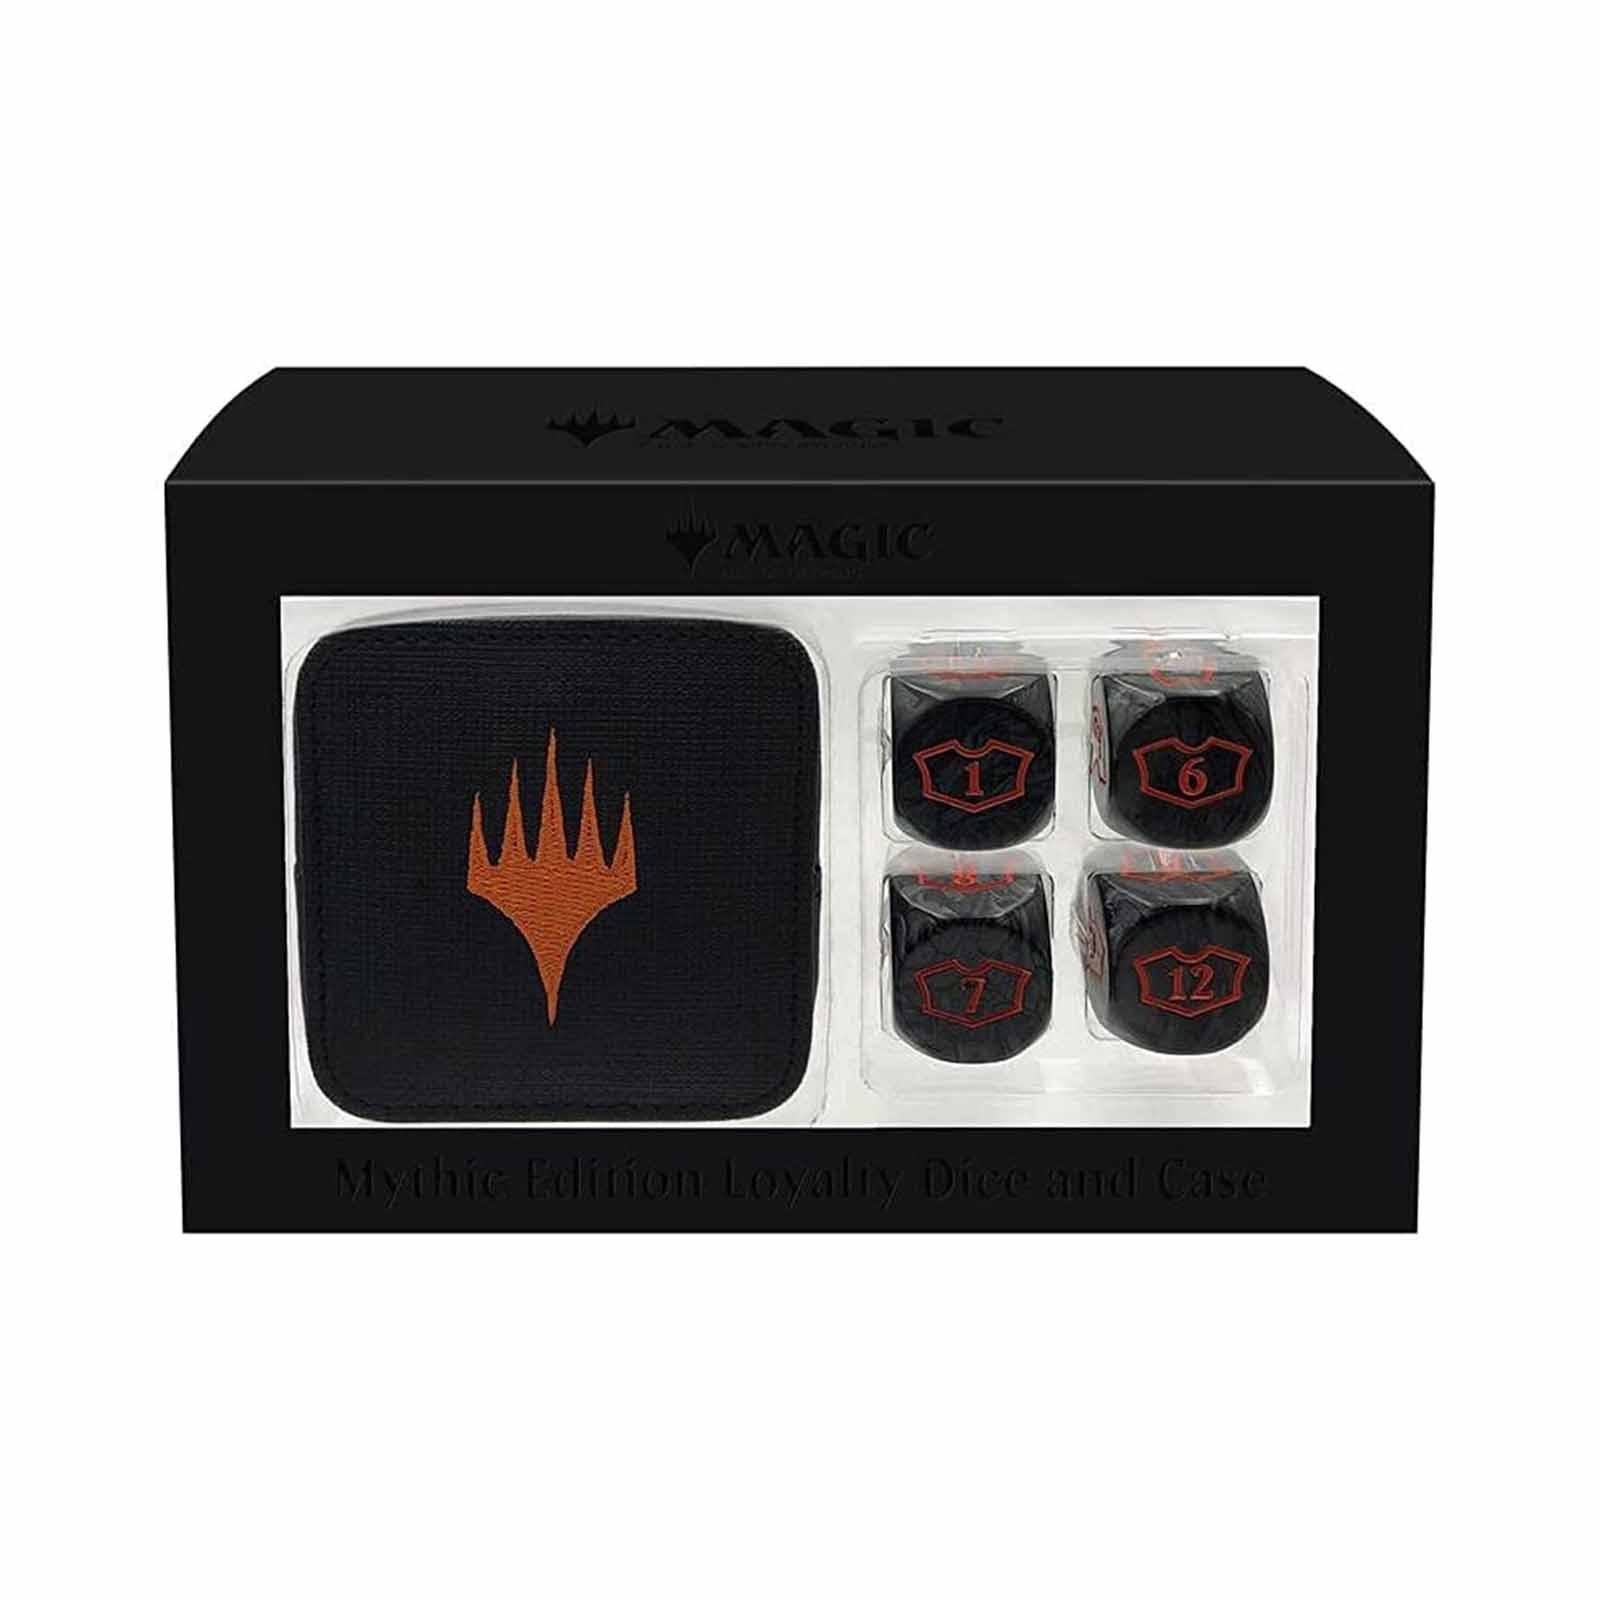 Mythic Edition Loyalty Dice and Case For Magic: The Gathering